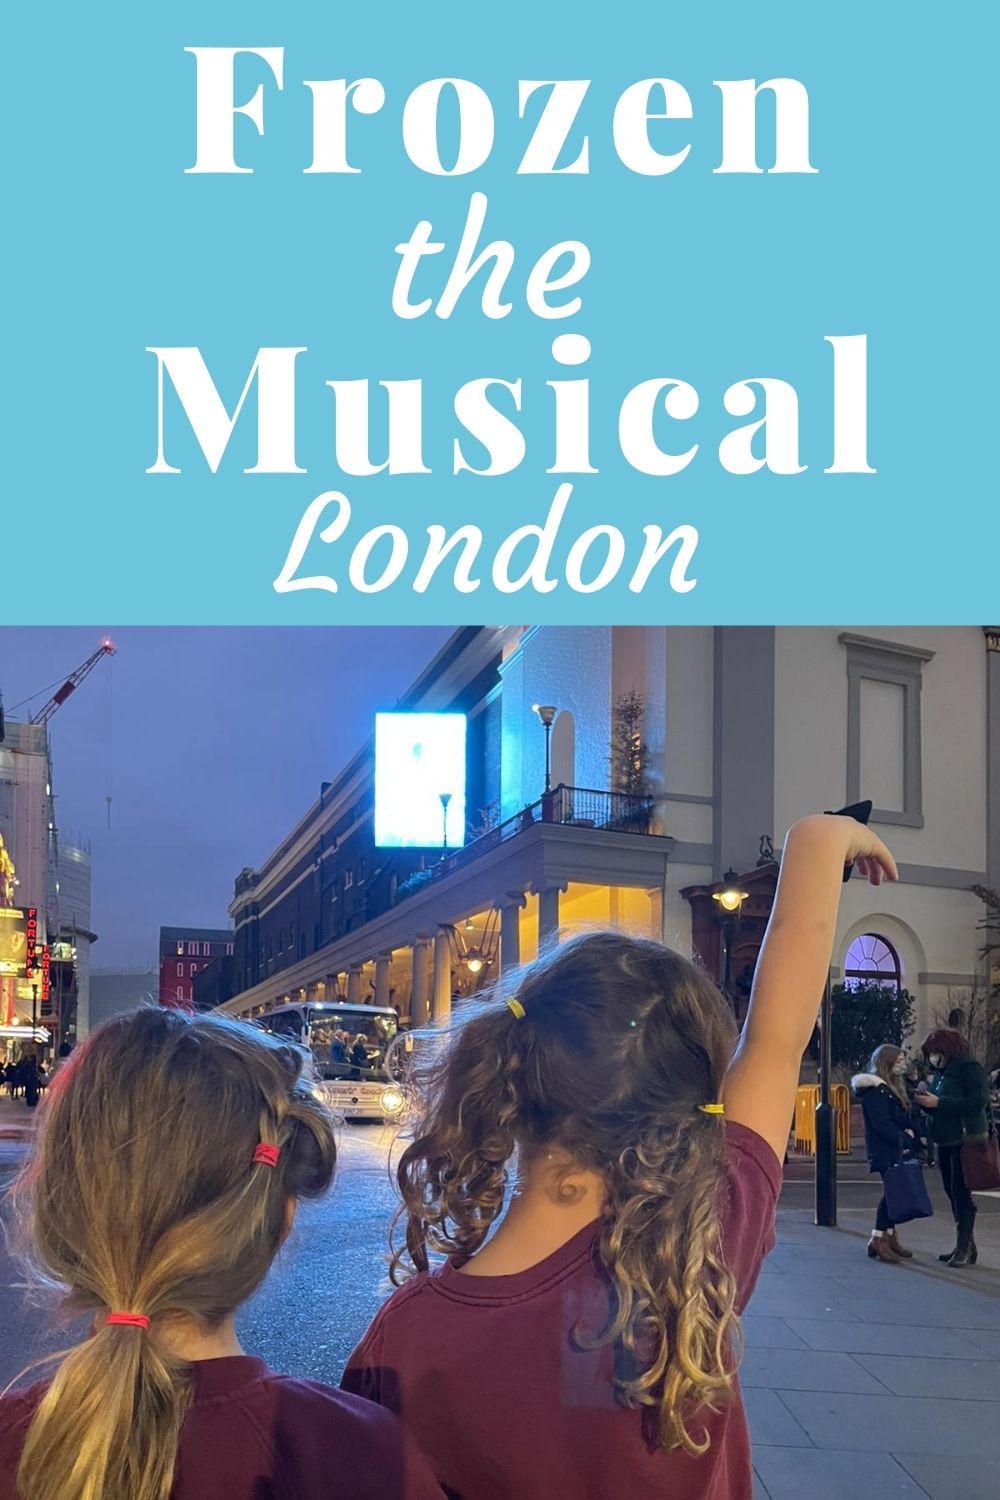 Frozen the Musical London Review